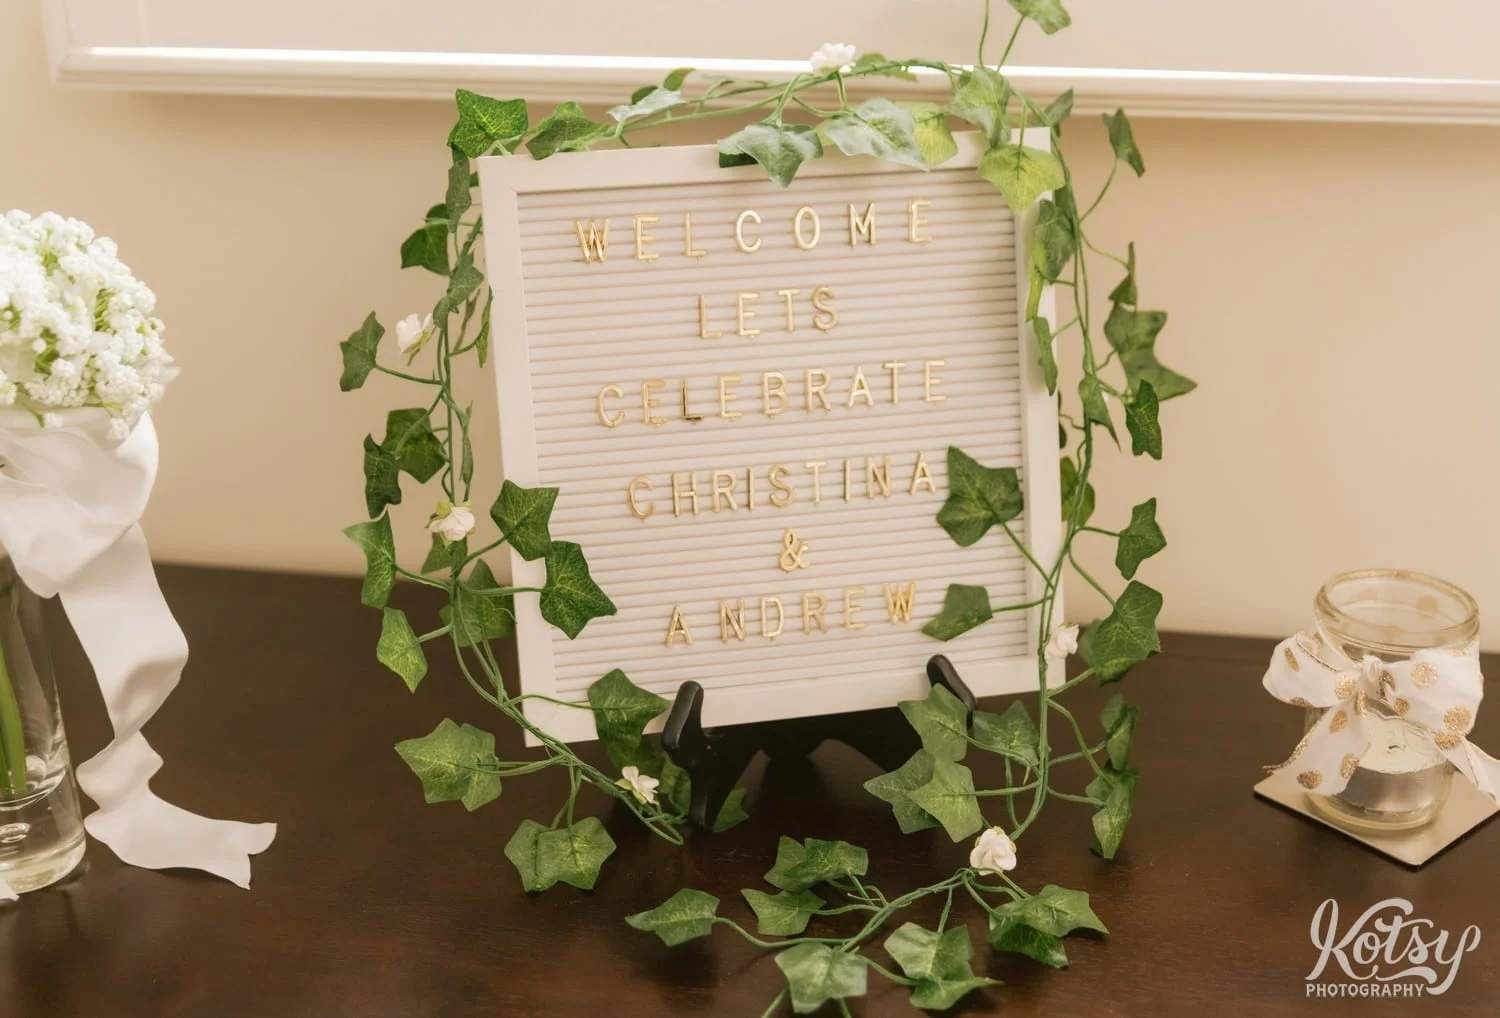 A sign reading "Welcome. Let's Celebrate Christina & Andrew" ss seen on a table with green plant wrapped around the frame